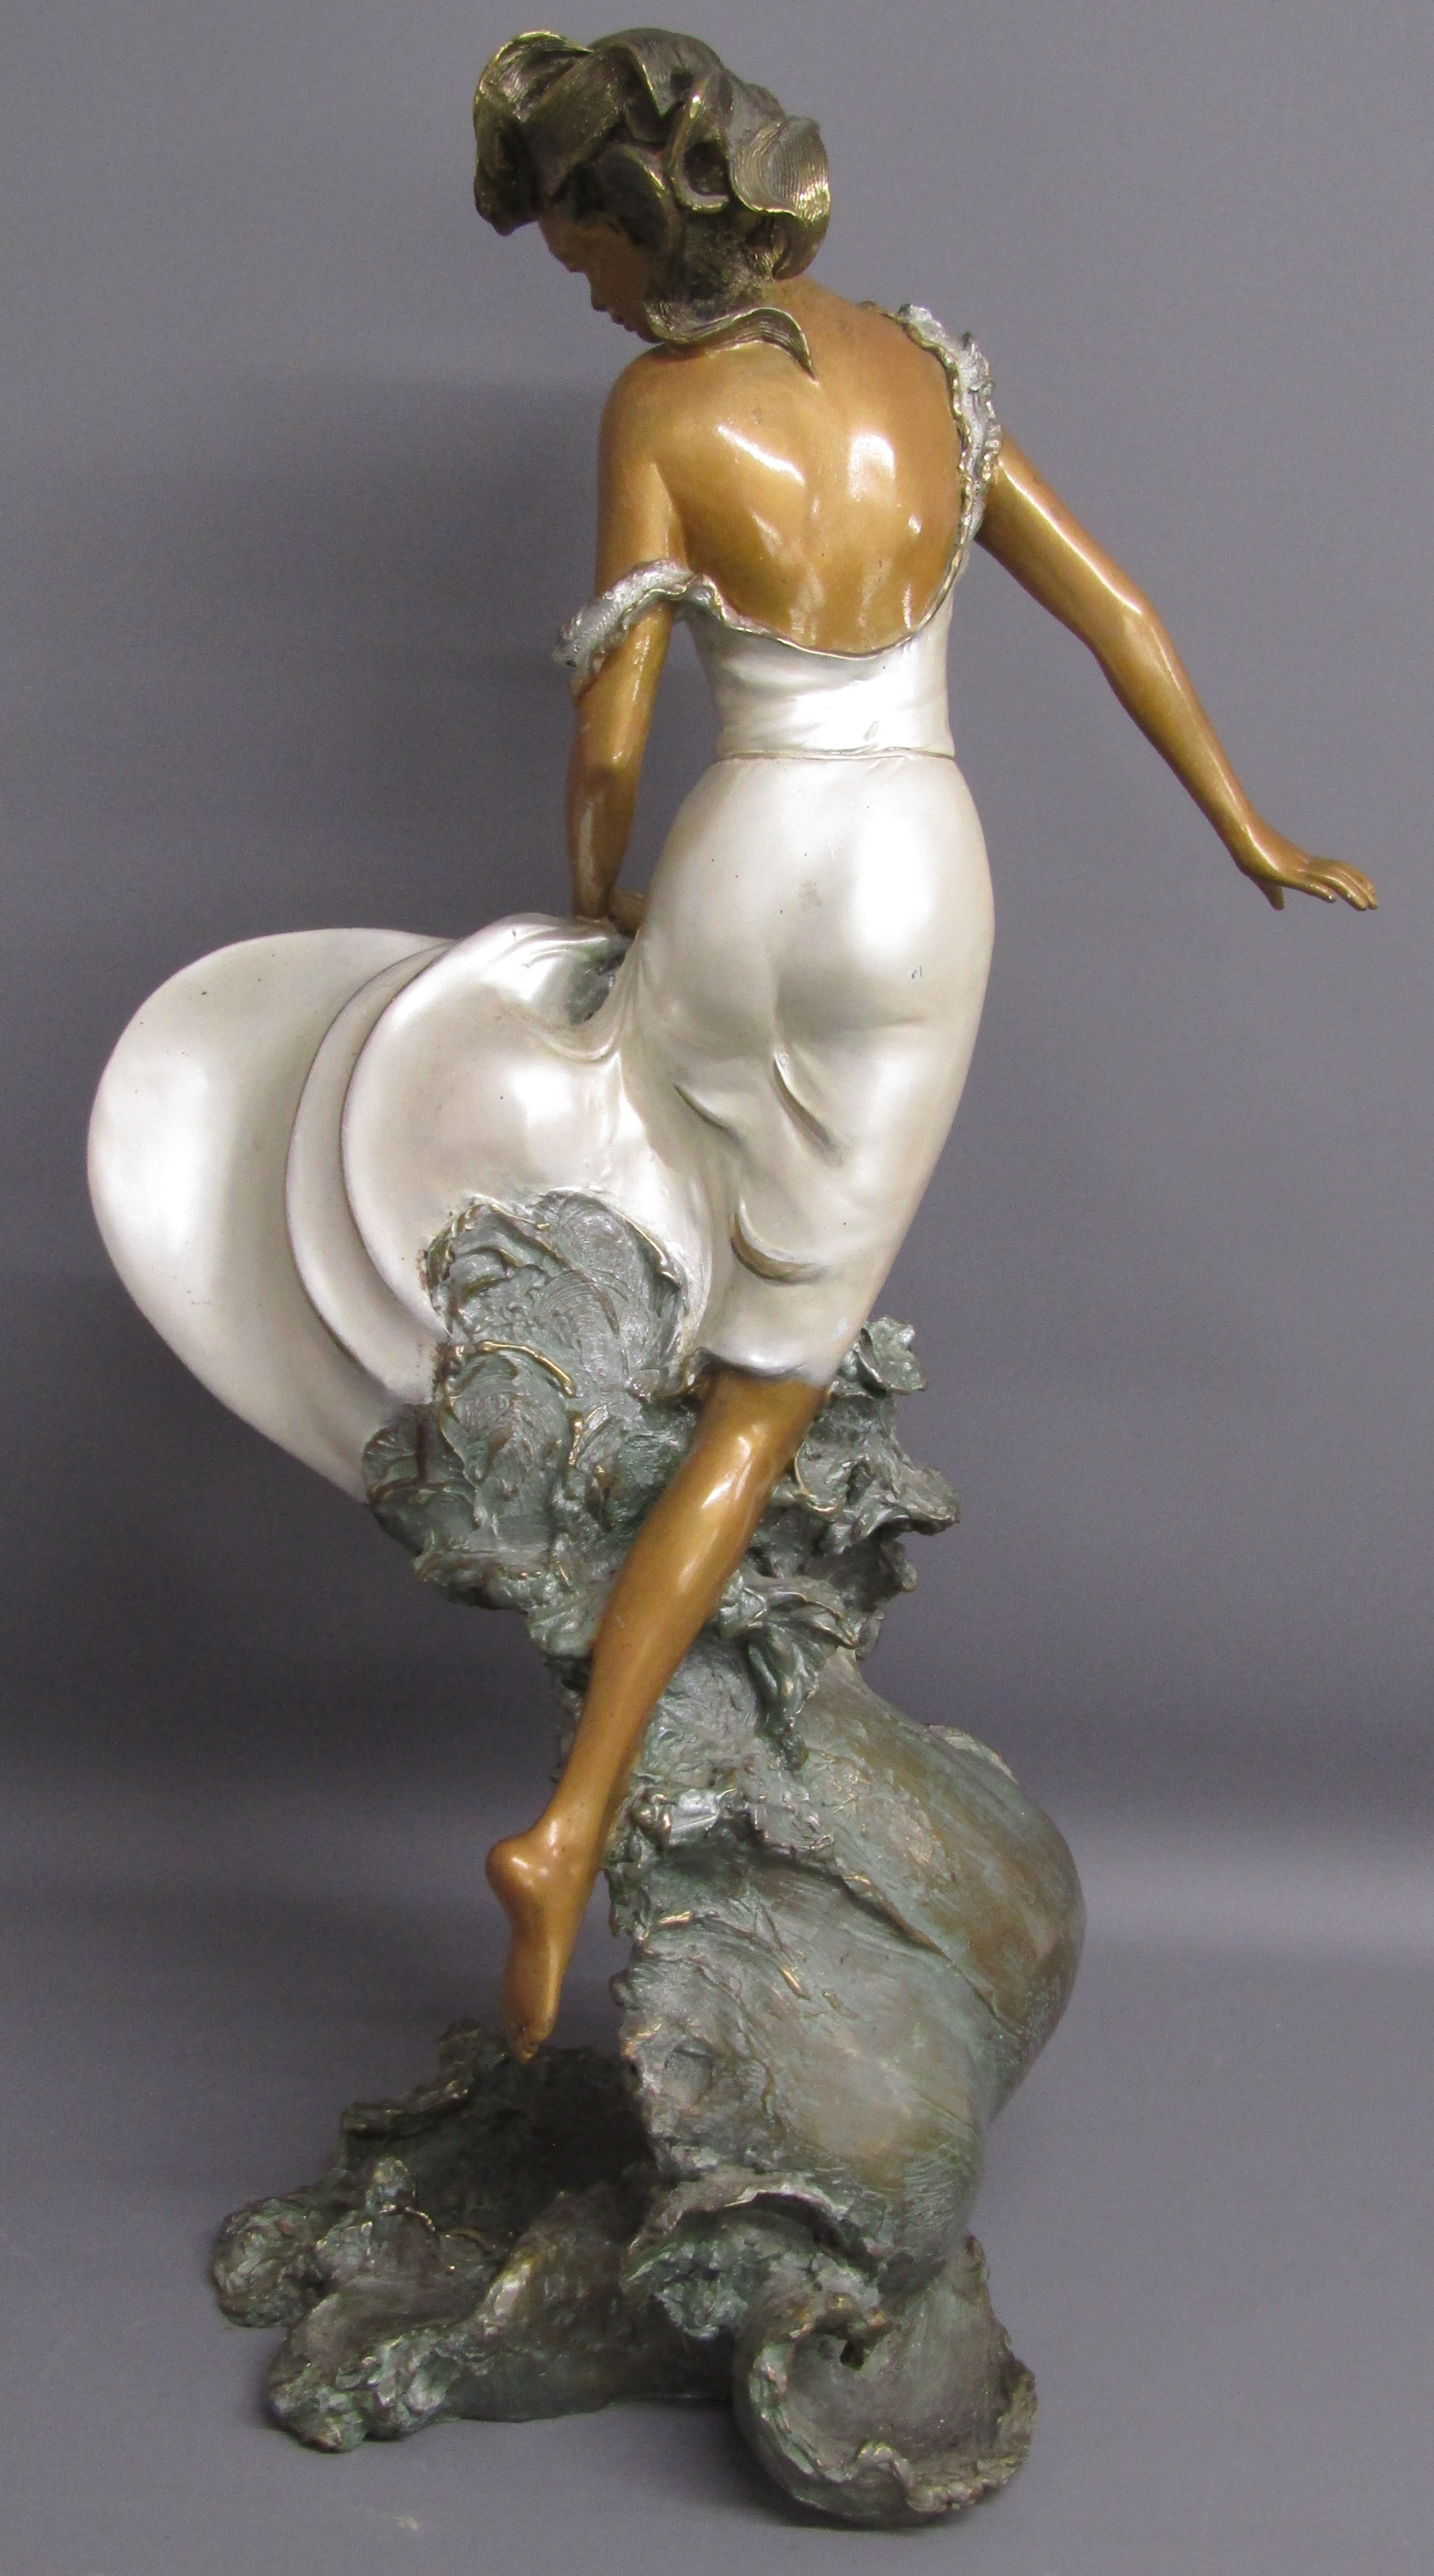 A. Basso bronze figure of lady with a dolphin on a wave, Ombri Fine Arts 1996 - approx. 65cm tall ( - Image 6 of 8